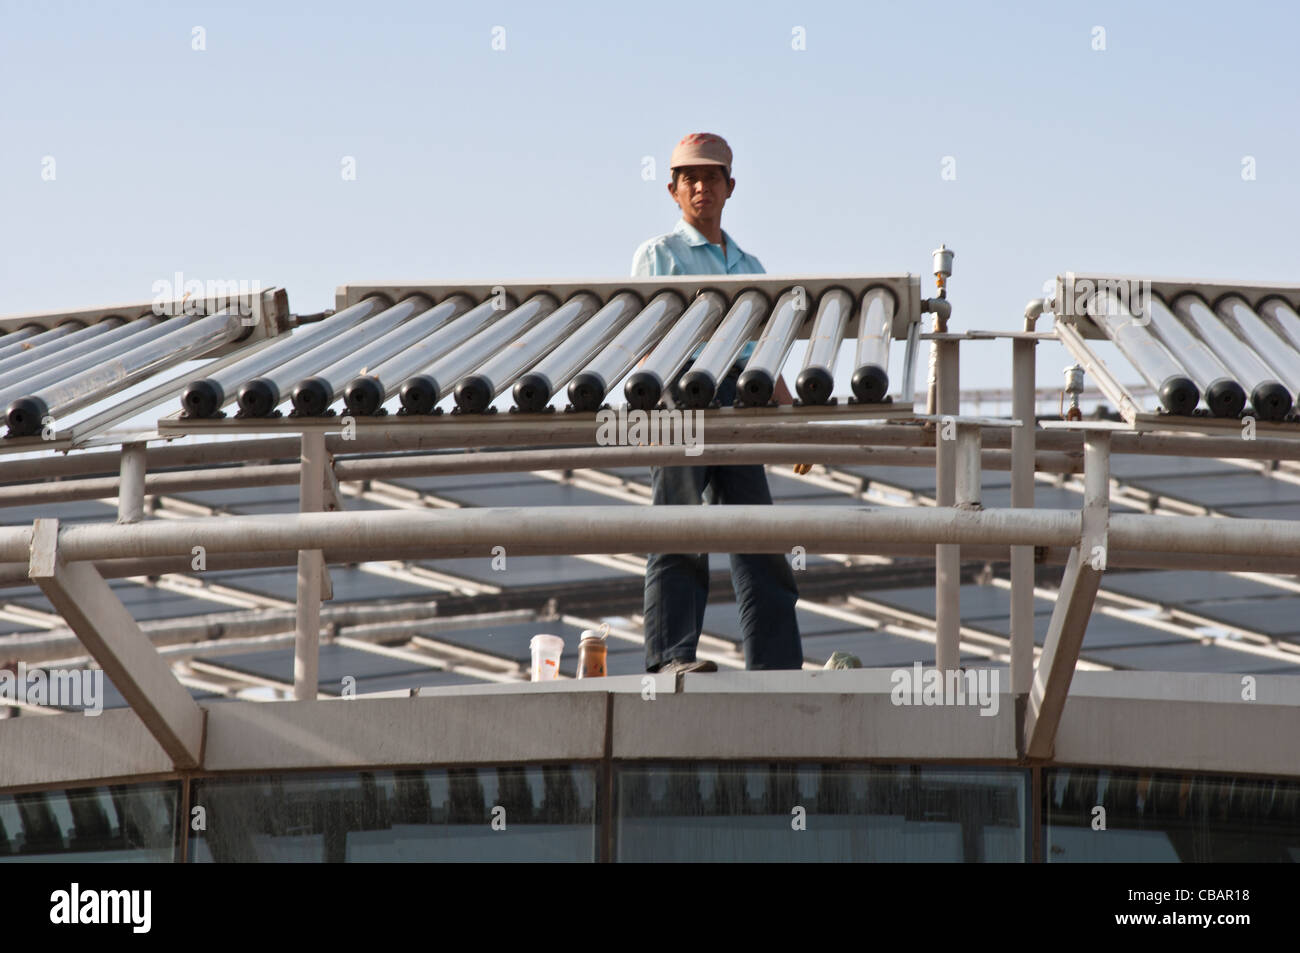 A worker on the roof of the Micro-E Hotel, world's largest solar powered hotel. China Solar Valley, Dezhou, Shandong, China Stock Photo